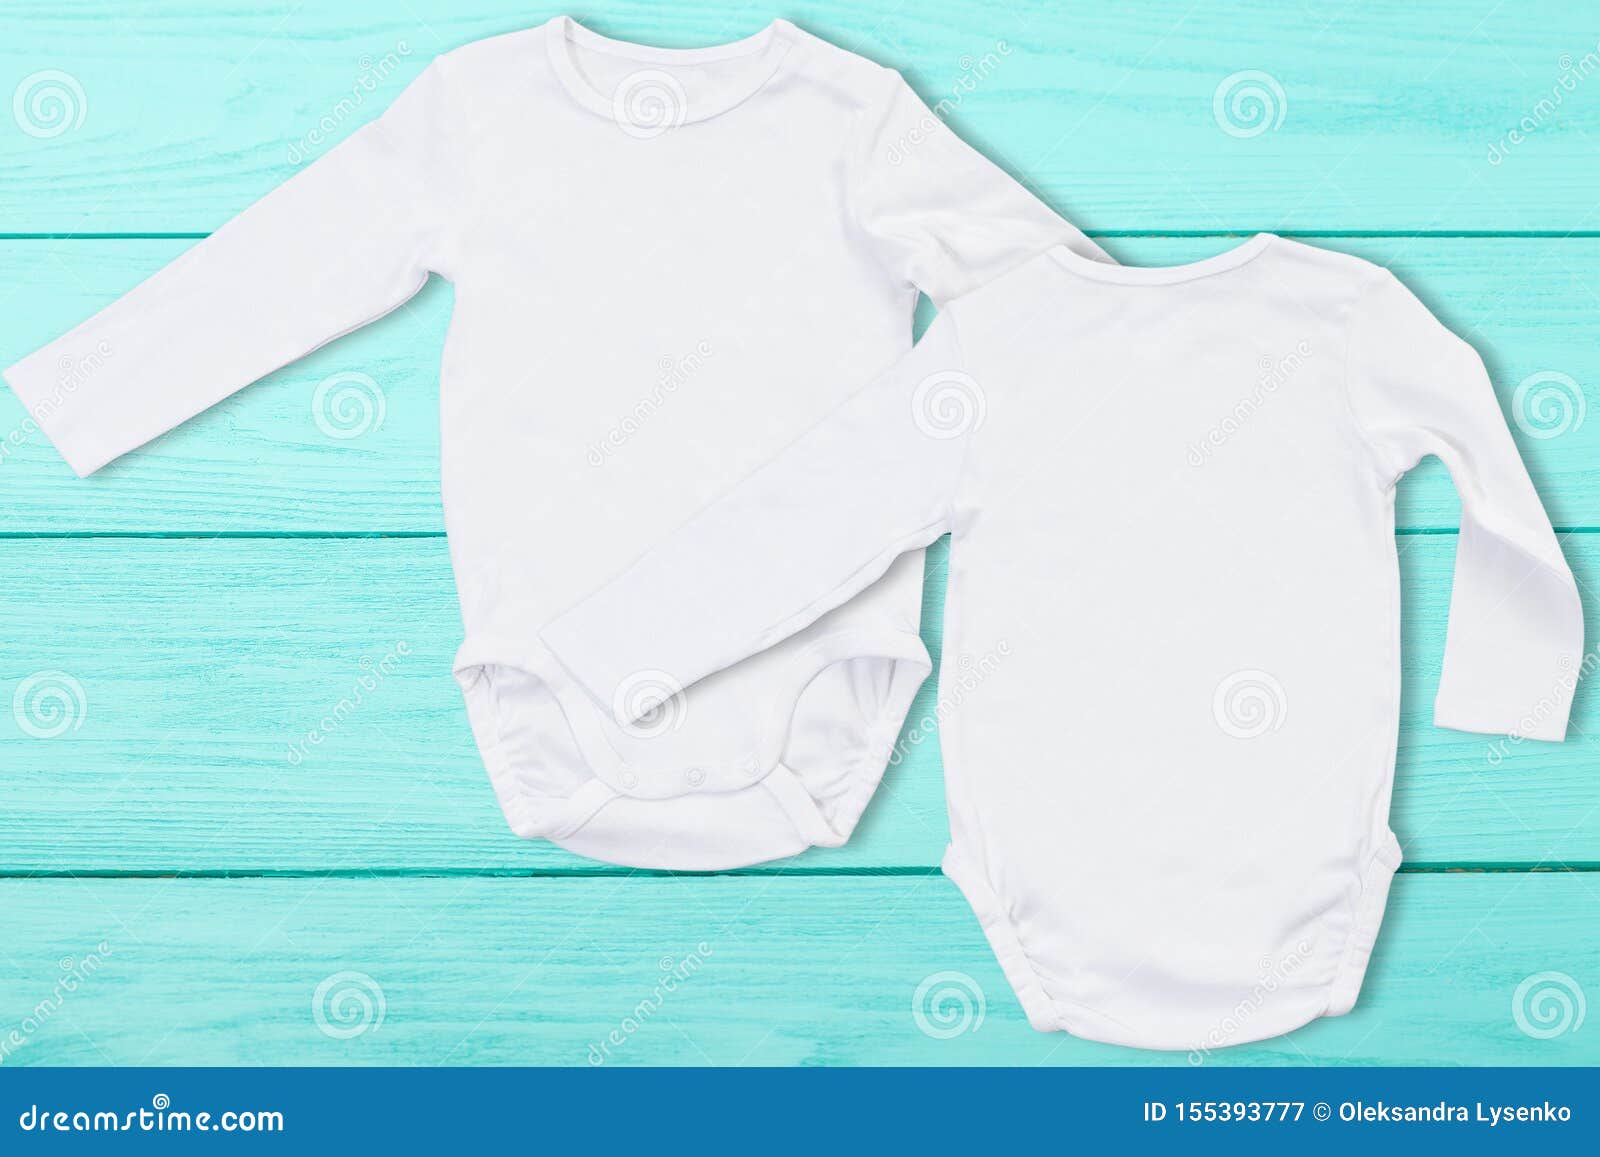 Download White Baby Mock Up Jumpsuit On Blue Wooden Background ...